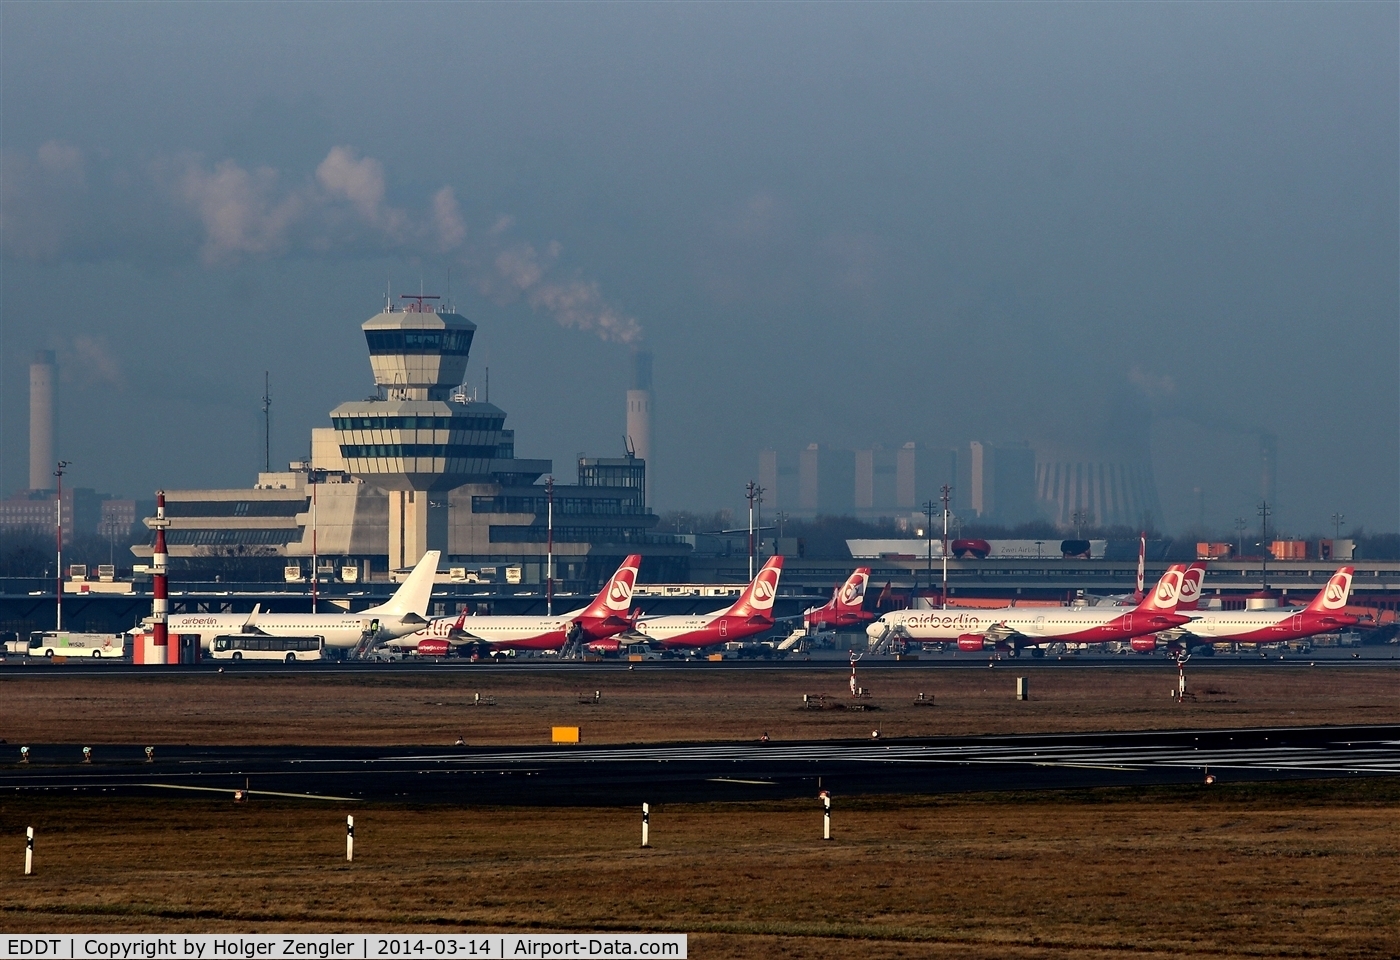 Tegel International Airport (closing in 2011), Berlin Germany (EDDT) - A frenzy in red and white - what a wonderful days for a plane spotter....